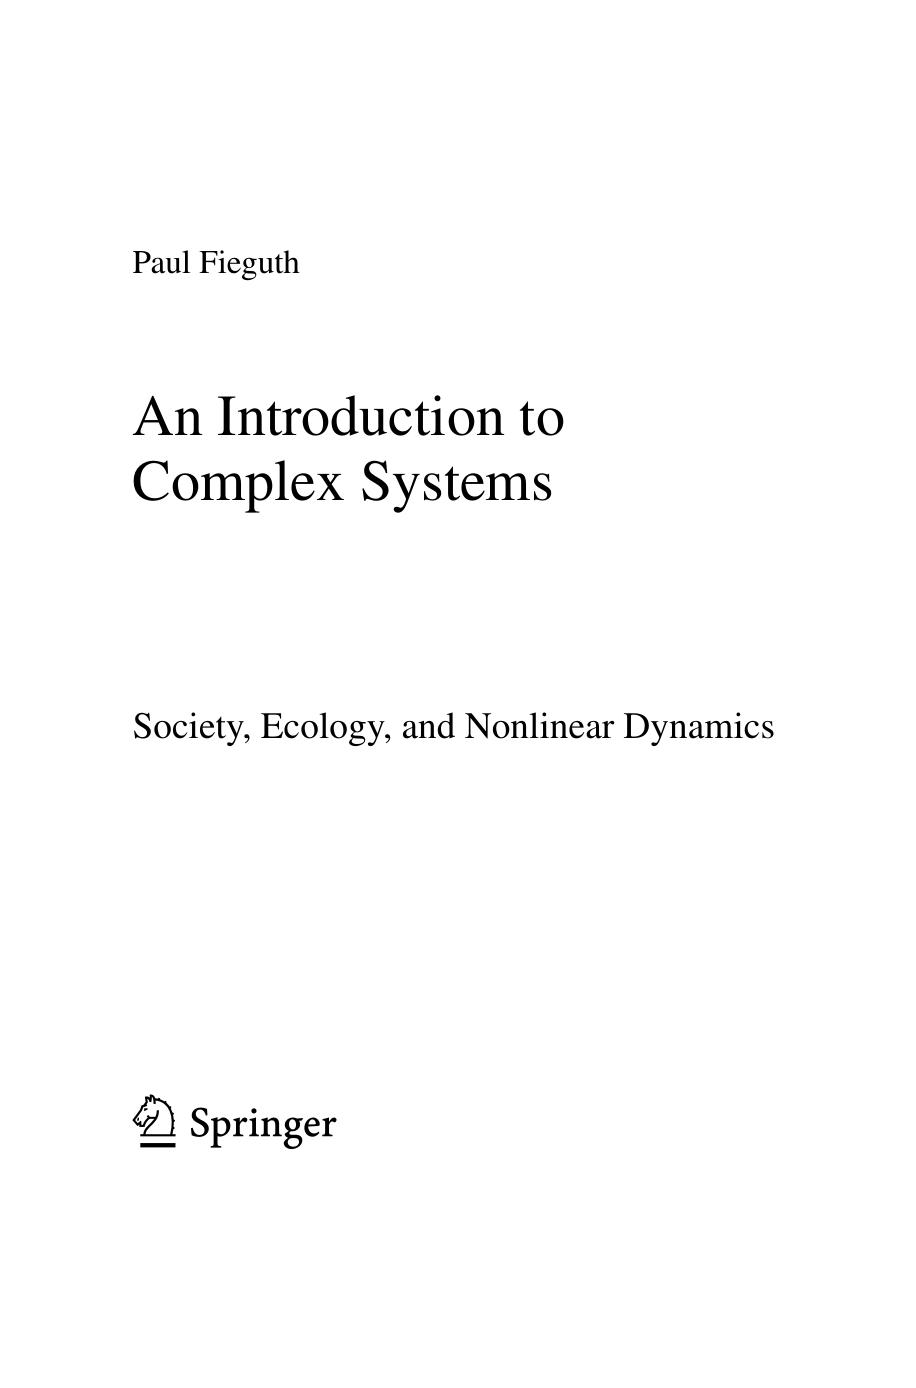 An Introduction to Complex Systems. Society, Ecology and Nonlinear Dynamica 2017